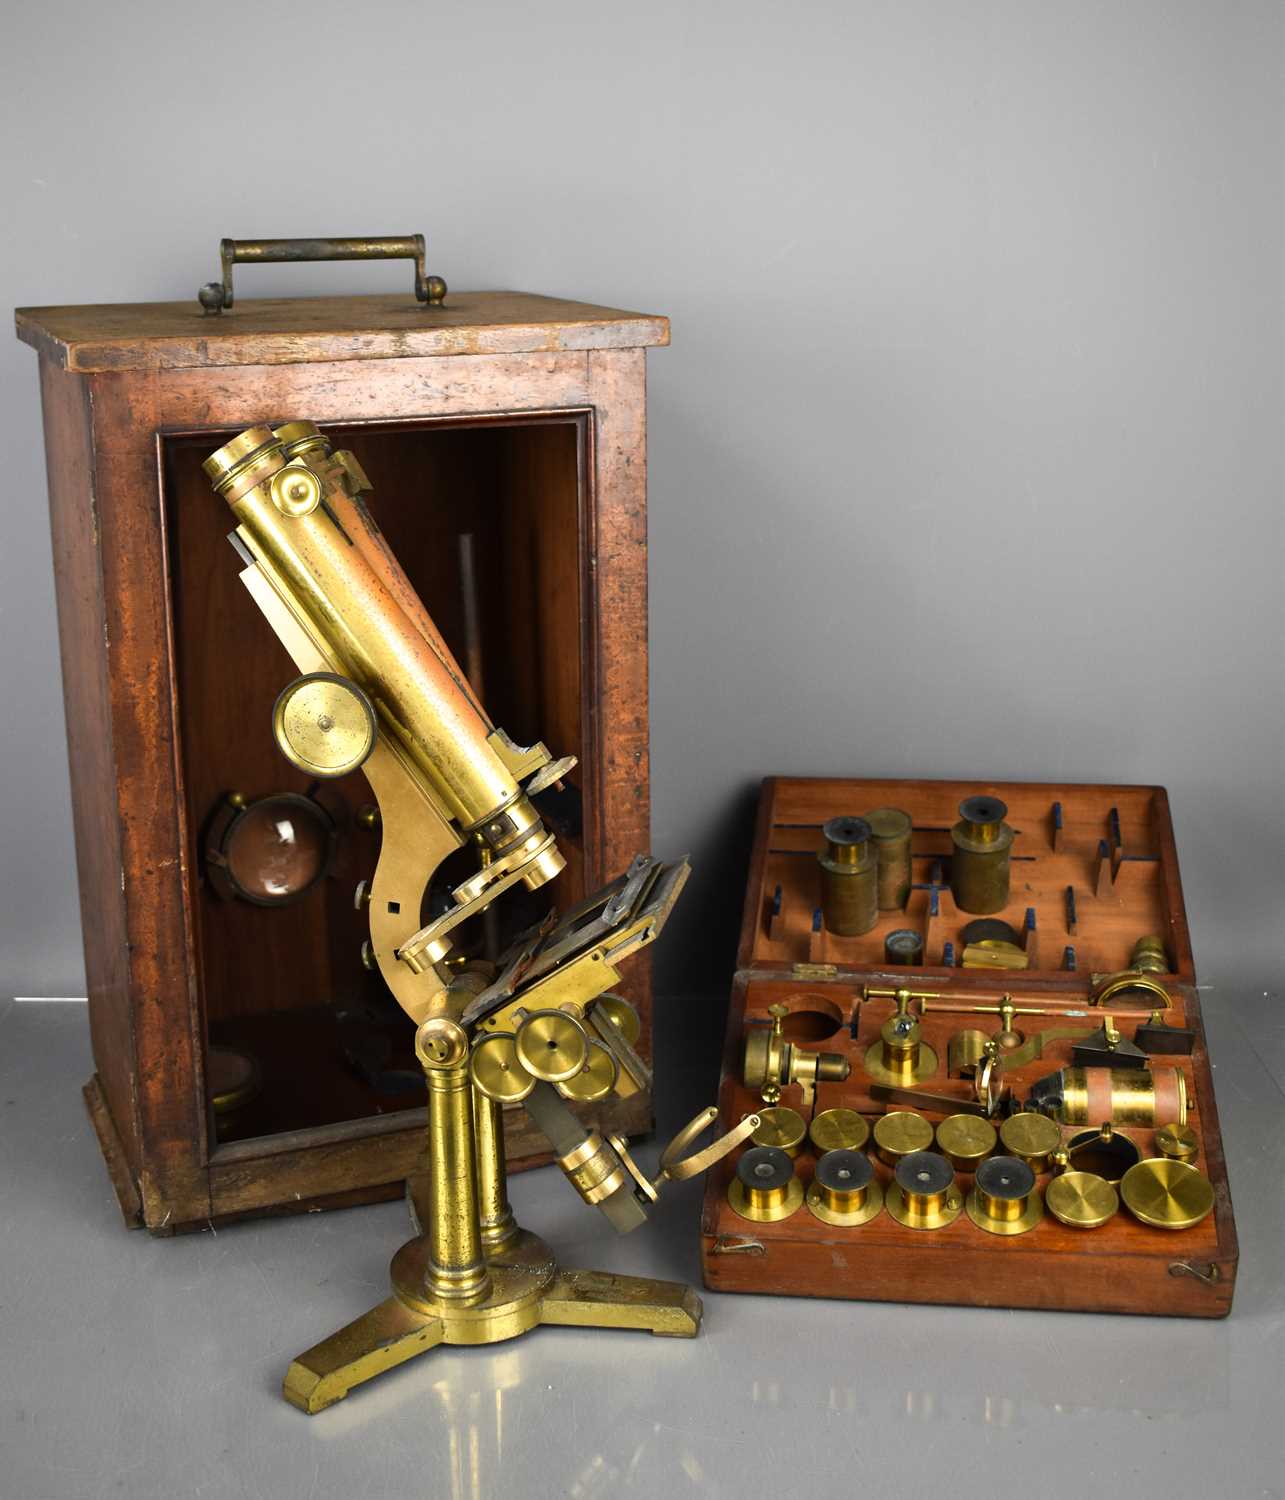 A 19th century Smith & Beck binocular Microscope in a mahogany case, the case holding a large - Bild 4 aus 4